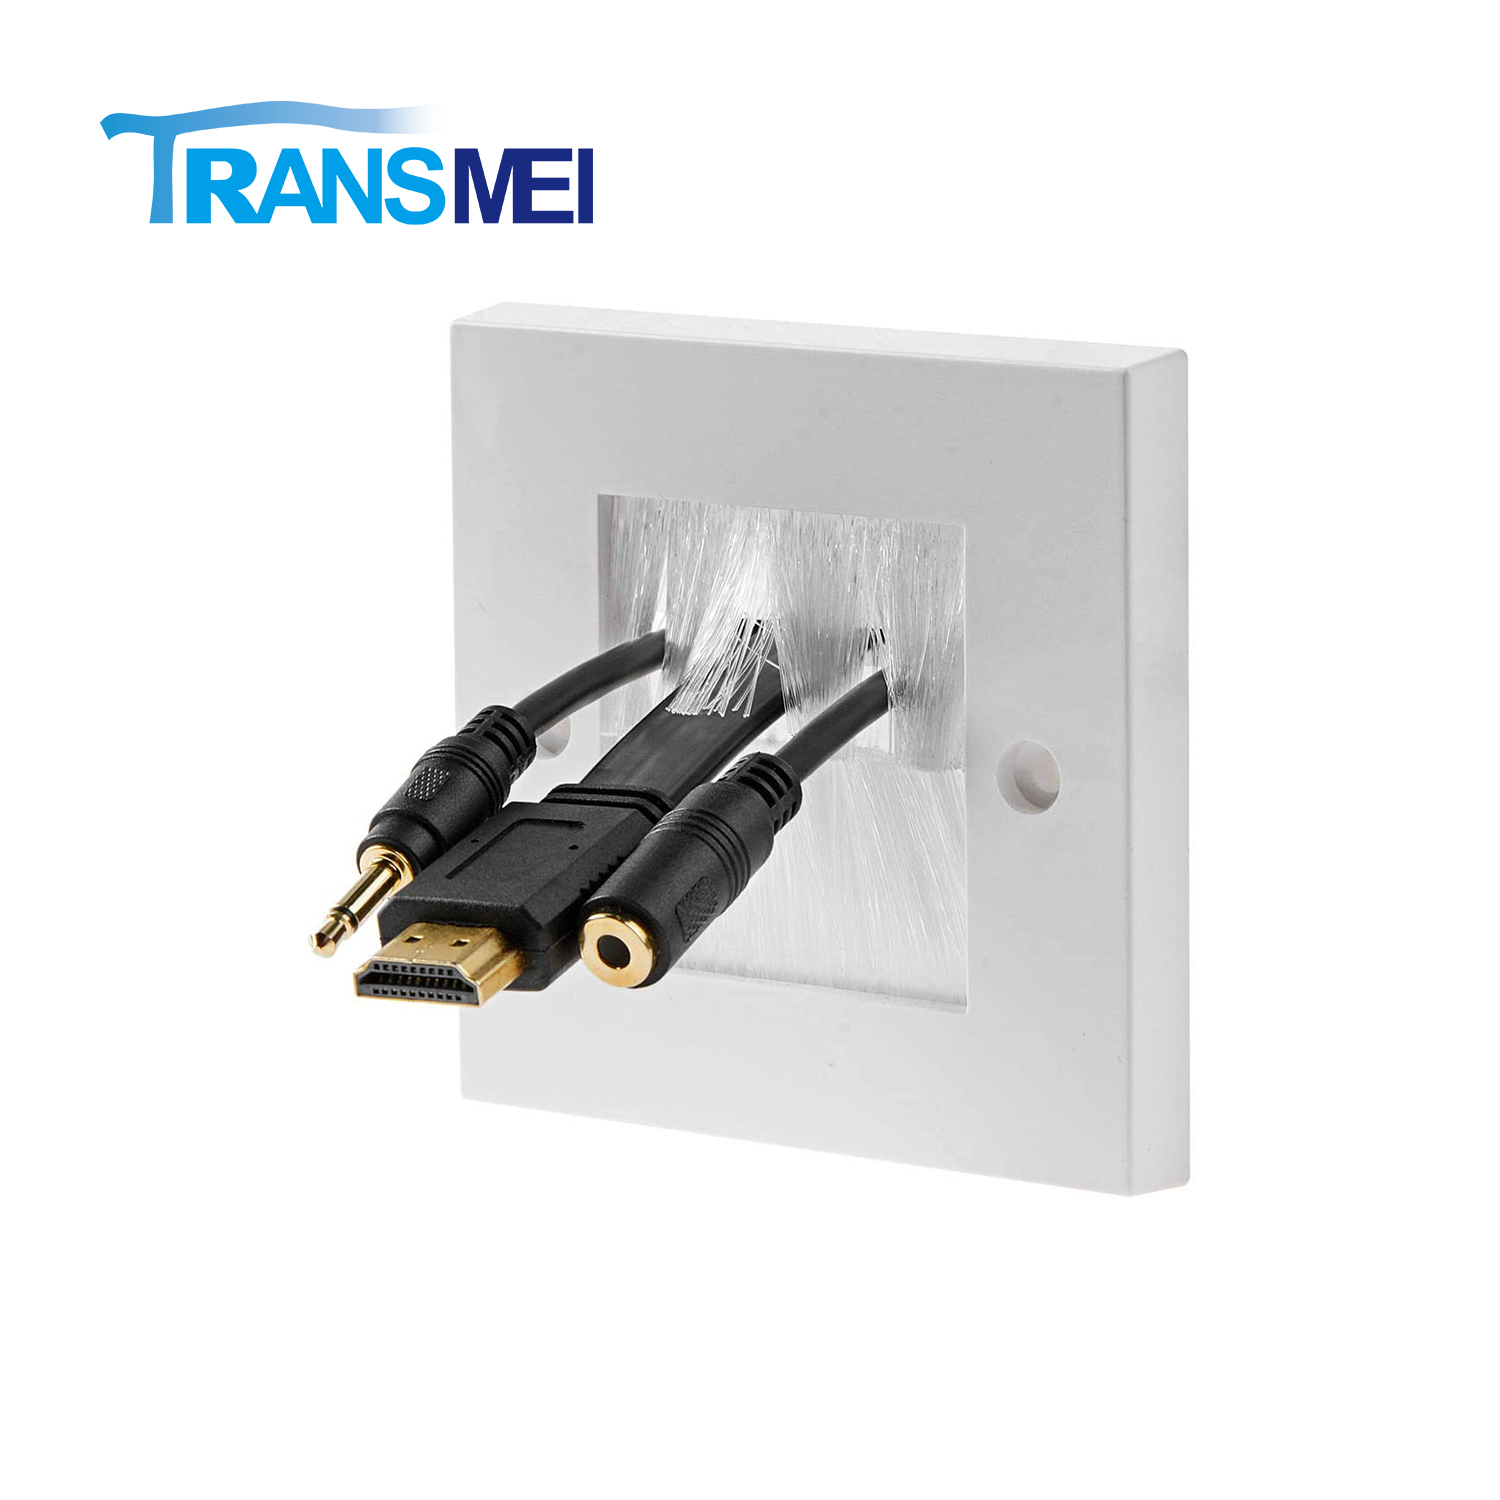 TM-1501 Wall Plate with Brush